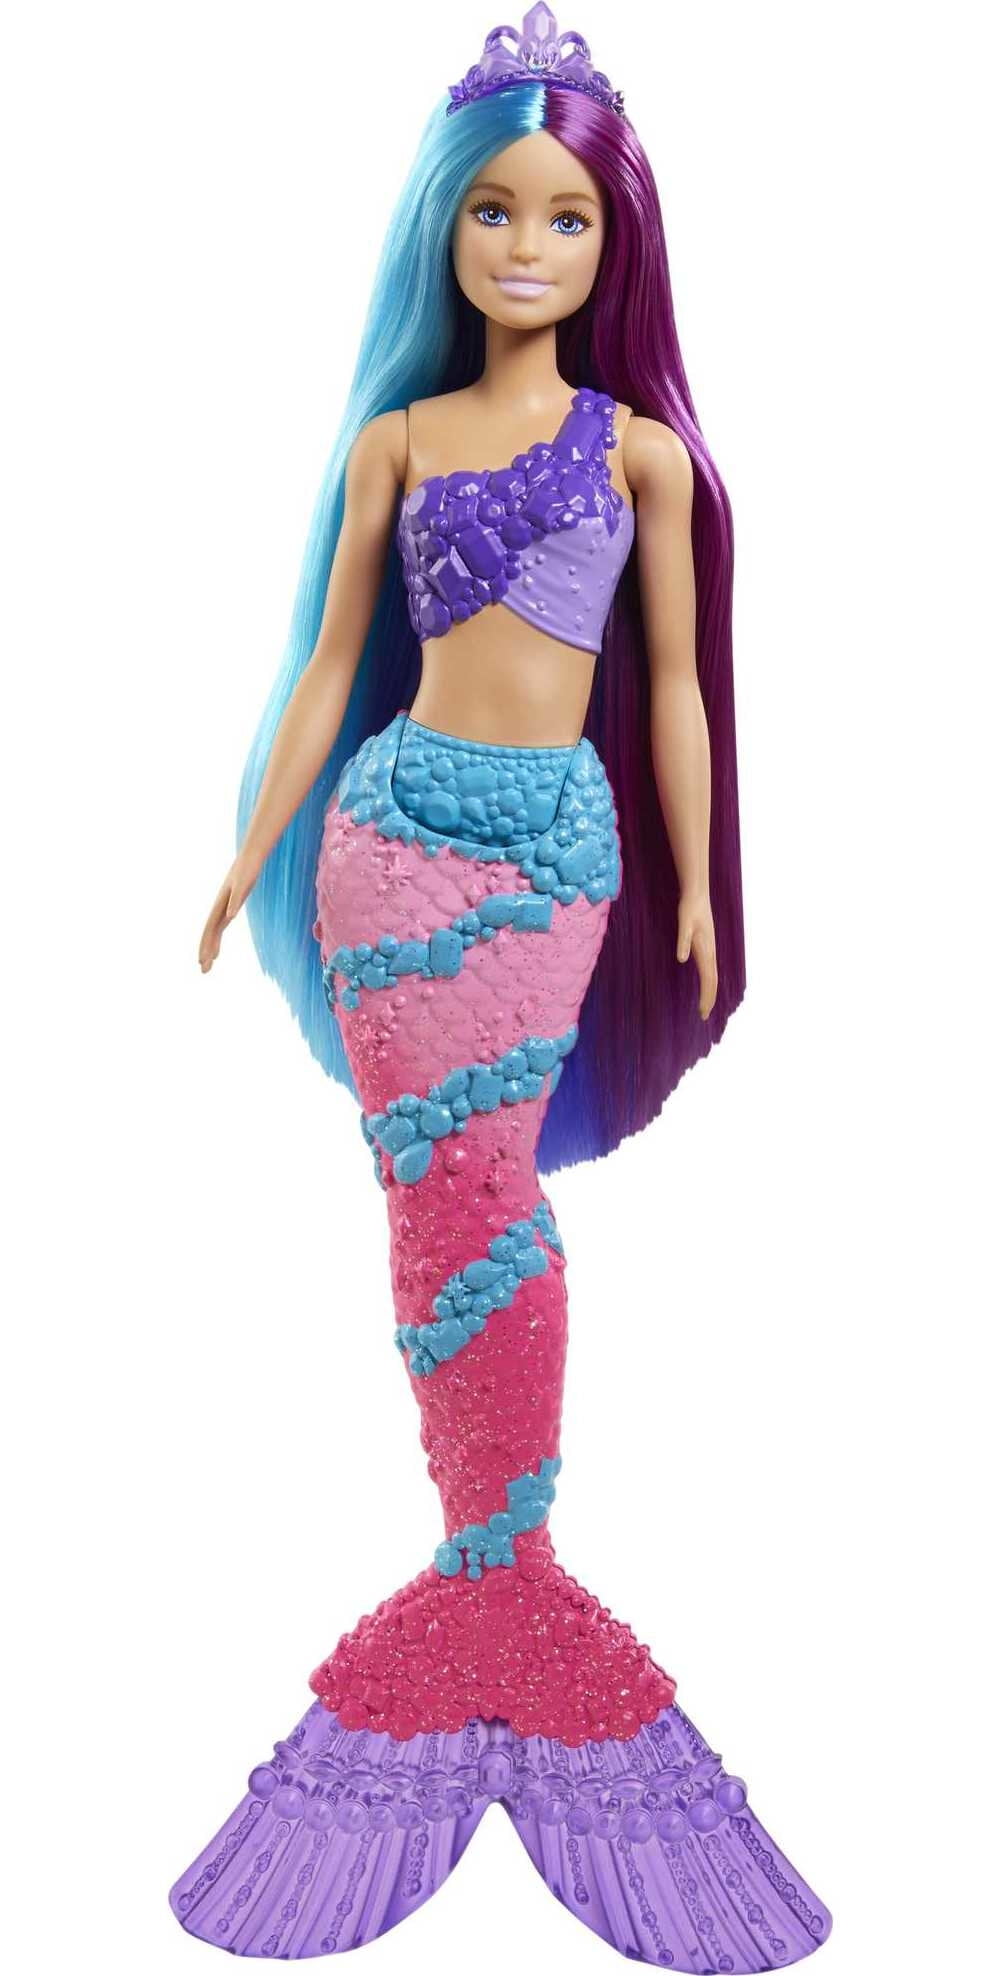 delicacy Panda so Barbie Dreamtopia Mermaid Doll (13-inch) with Extra-Long Two-Tone Fantasy  Hair, Hairbrush, Tiaras and Styling Accessories, Gift for 3 to 7 Year Olds  - Walmart.com